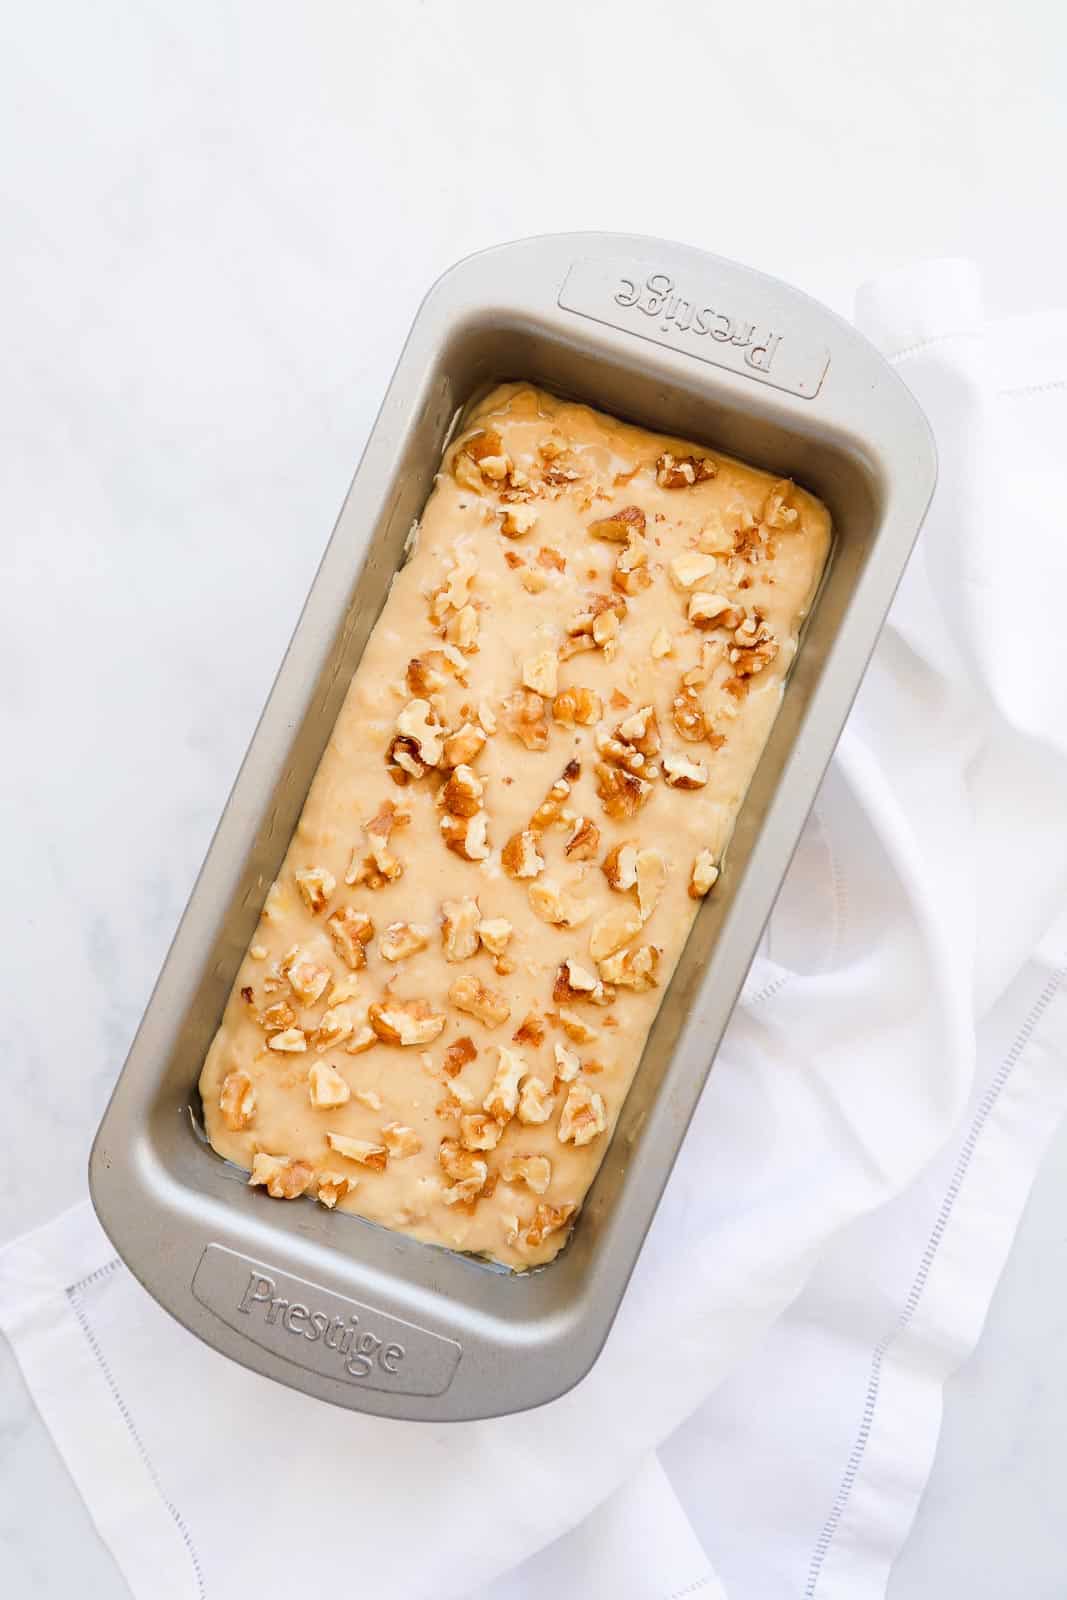 The dough in a loaf pan decorated with crushed walnuts.